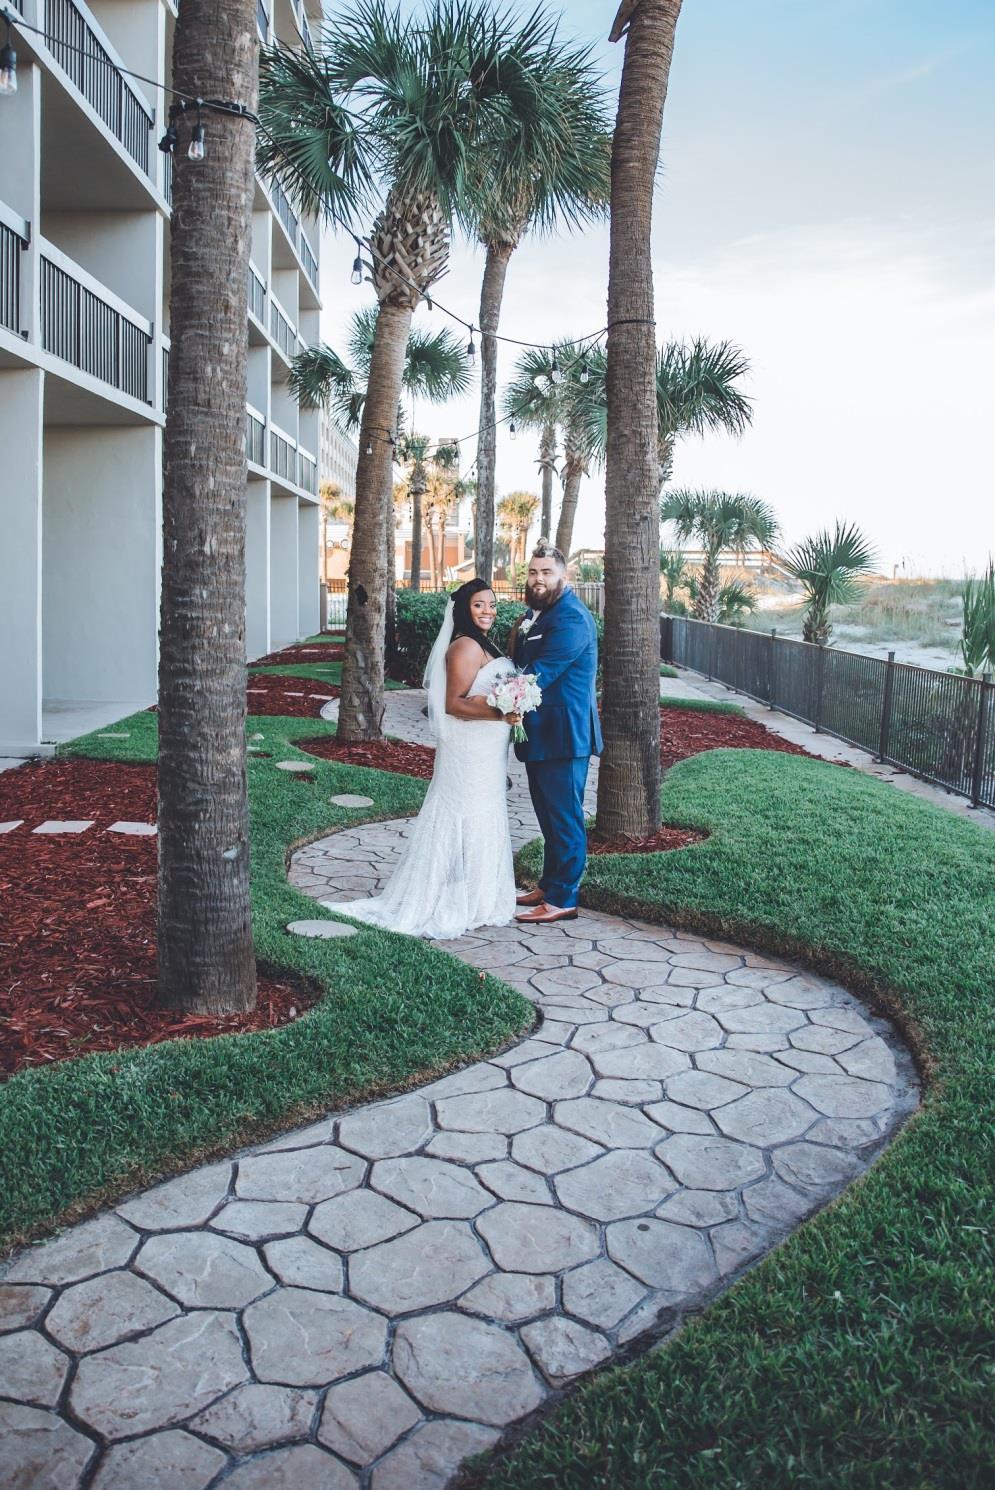 CONGRATULATIONS Wedding dreams become a reality at The Hampton Inn Oceanfront.